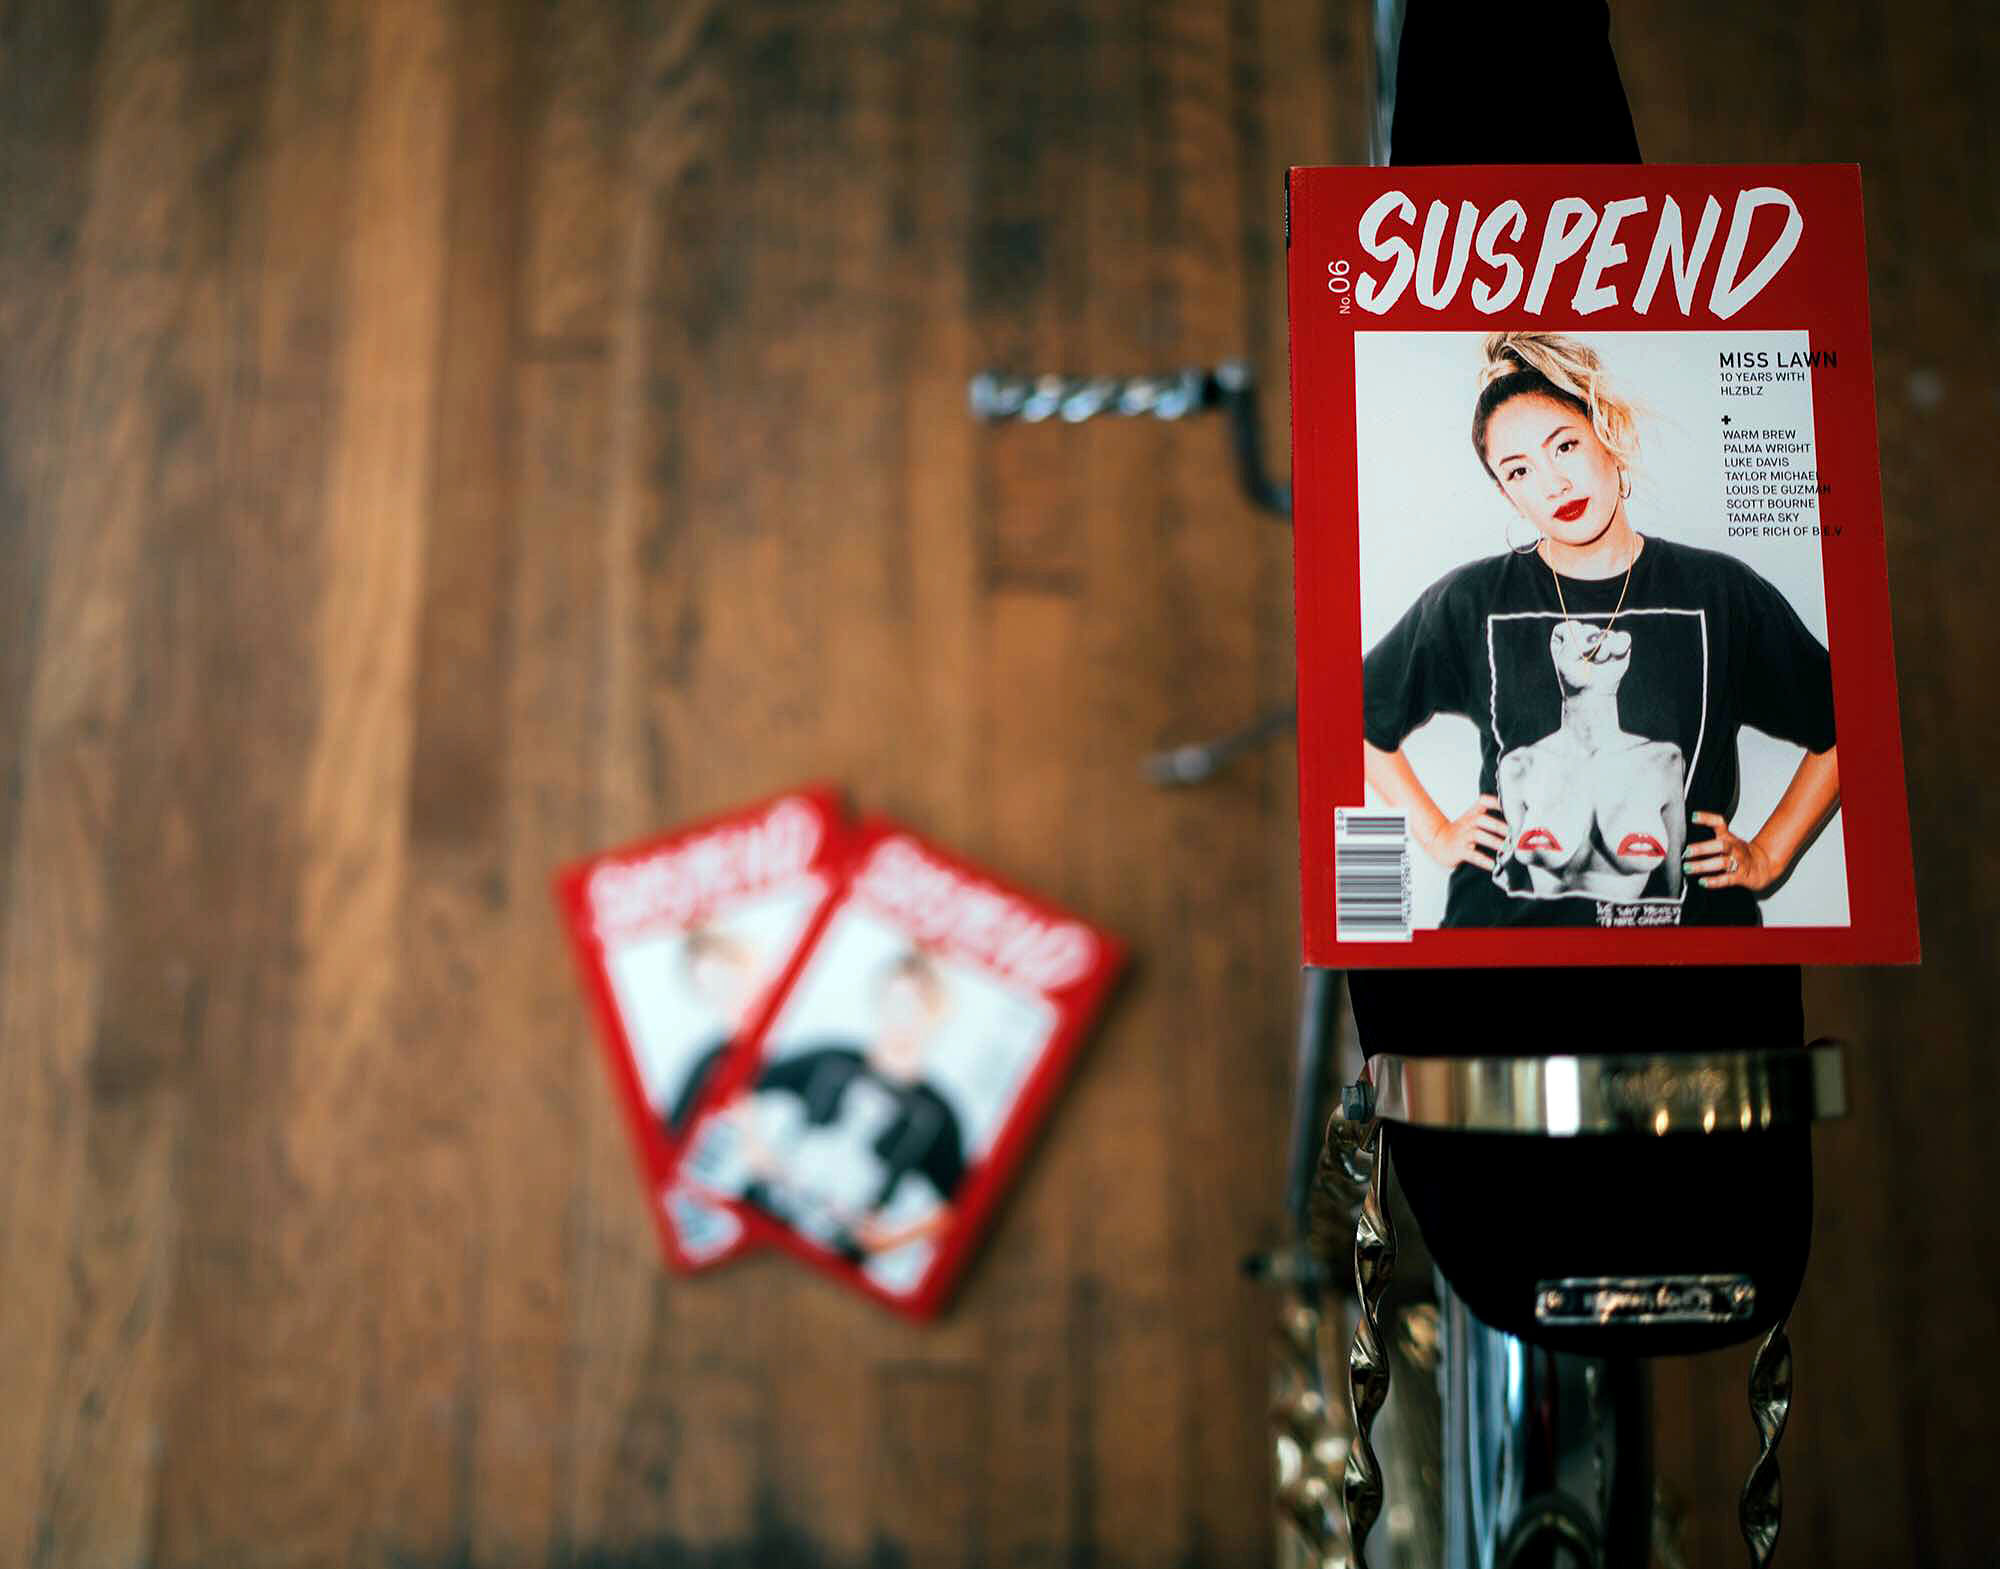  SUSPEND Magazine available at ESTATE in Seattle. / Photo Courtesy of David Lee 